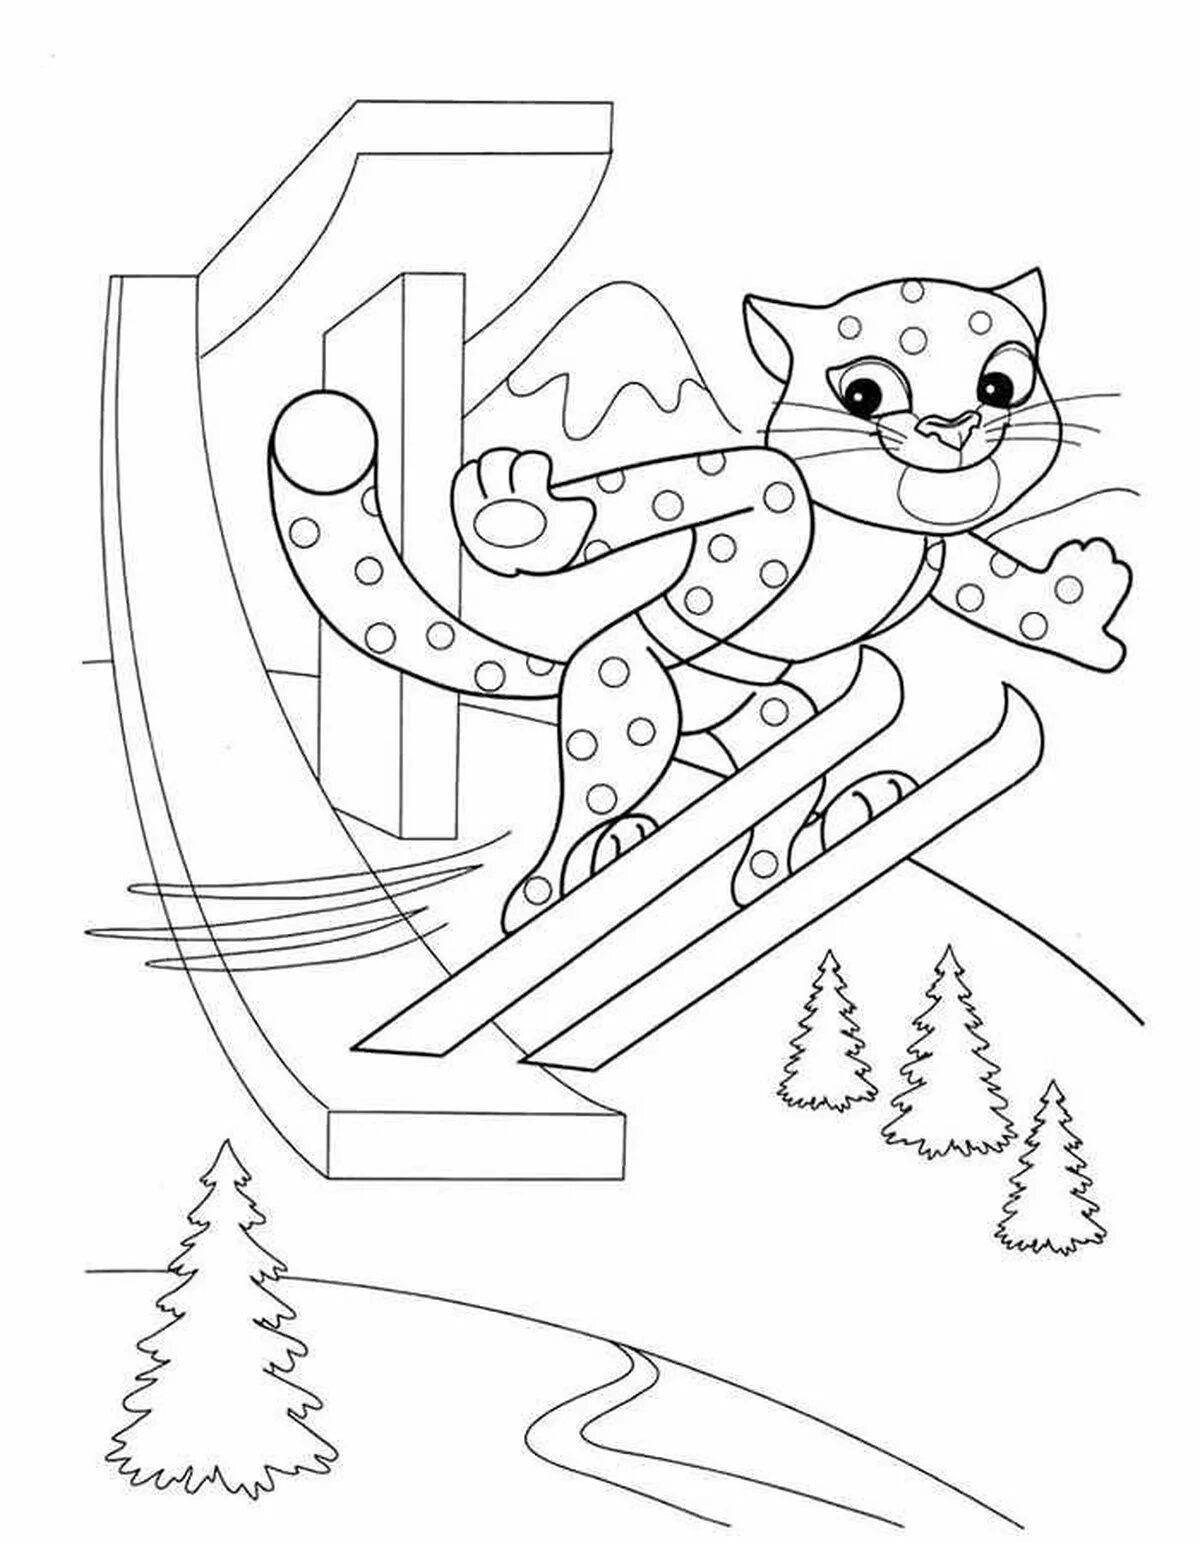 Outstanding winter sports coloring book for kids